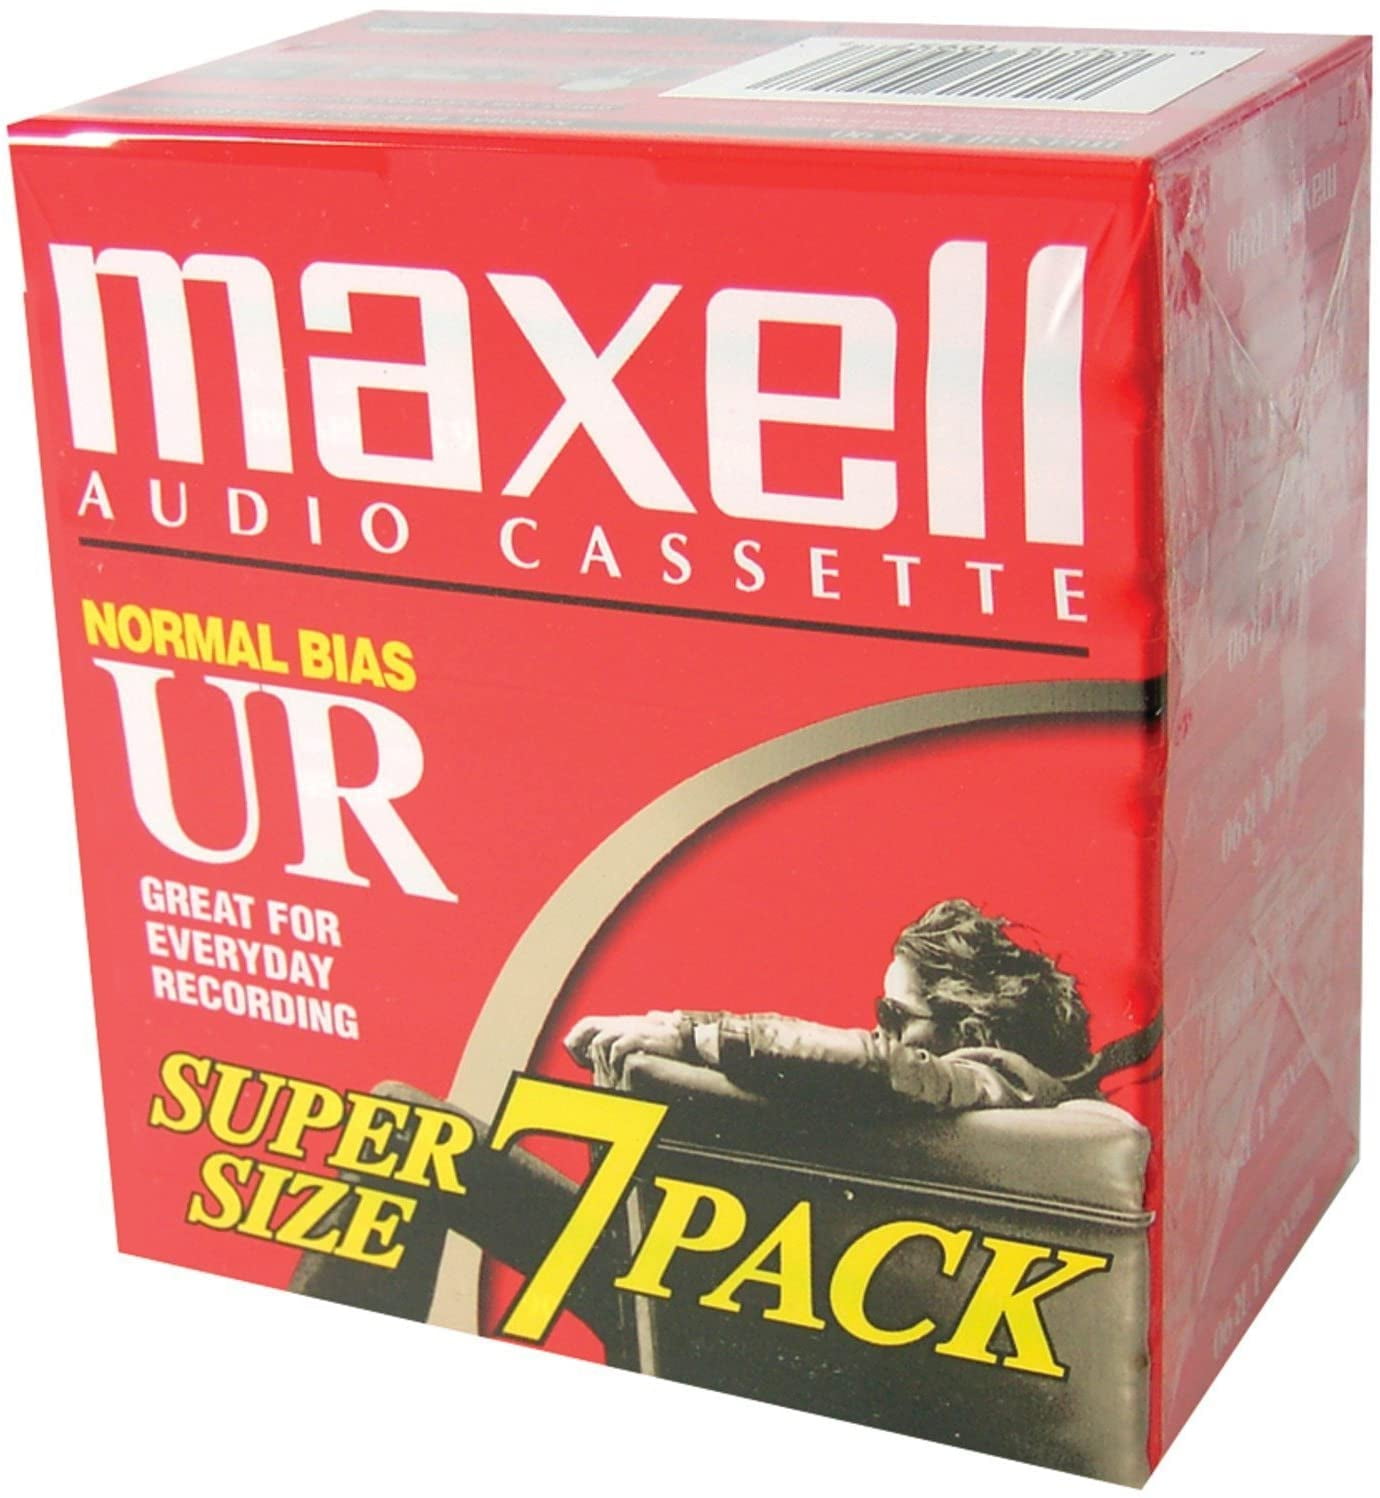 Maxell 90 minutes Blank Audio Cassette Tape 